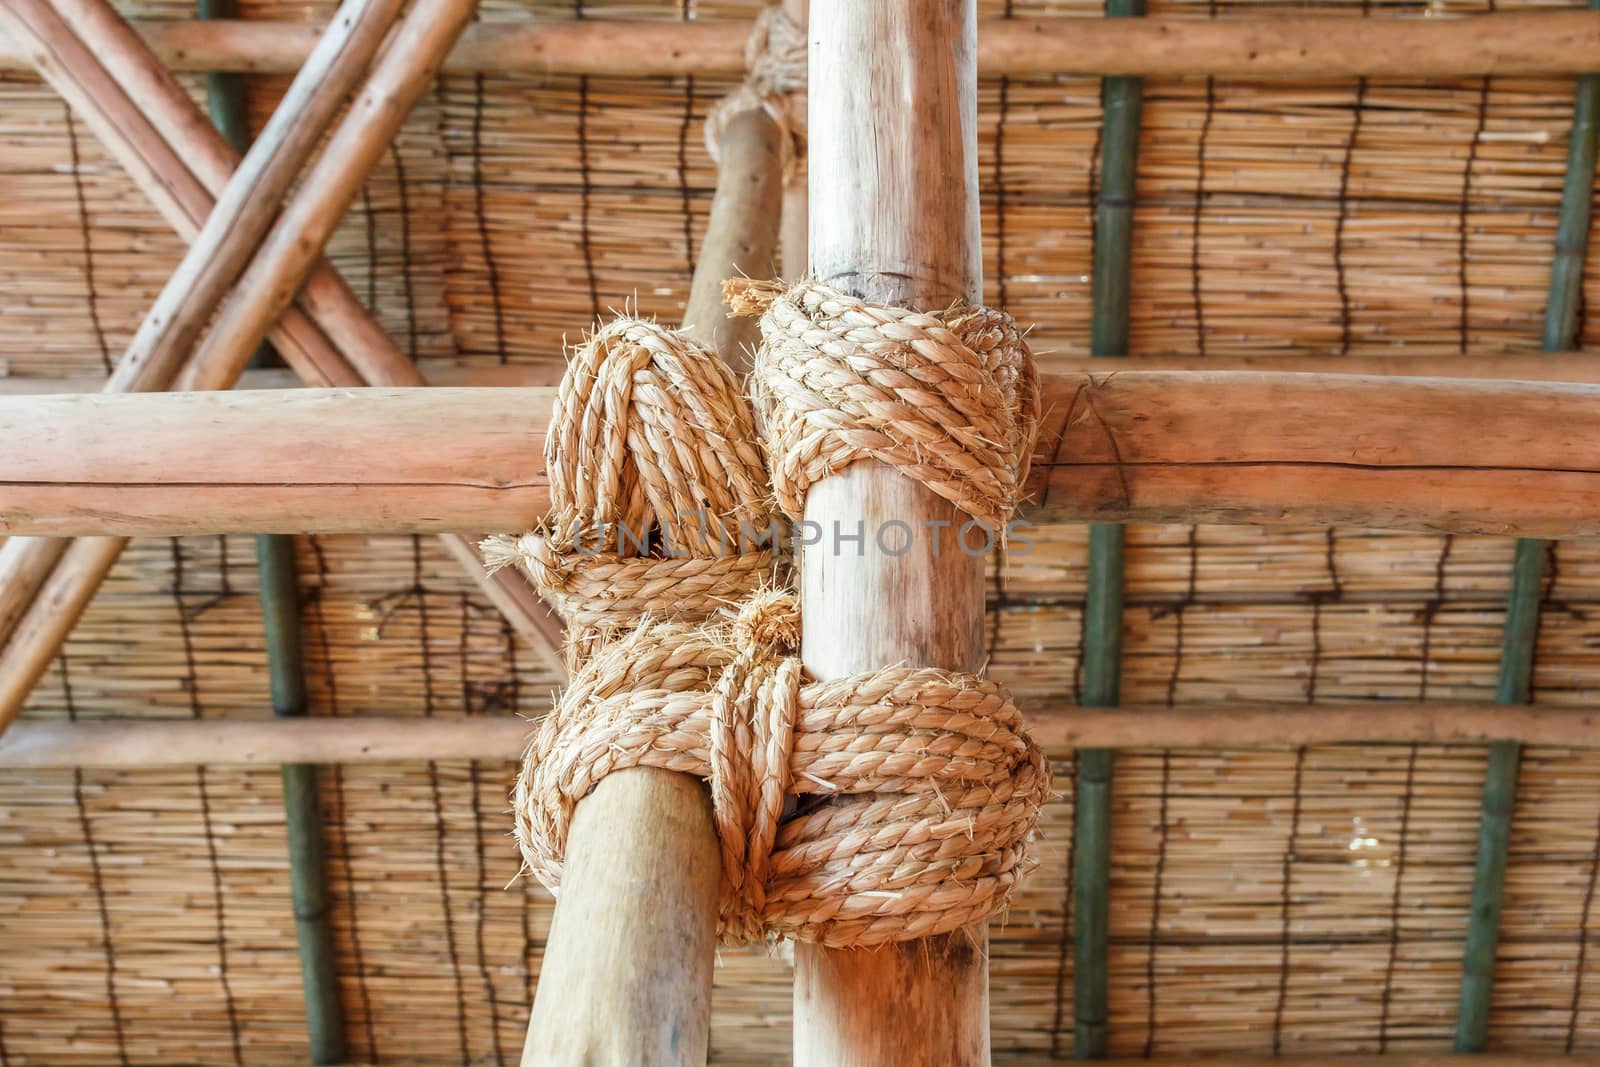 Rope tied wood pole together.